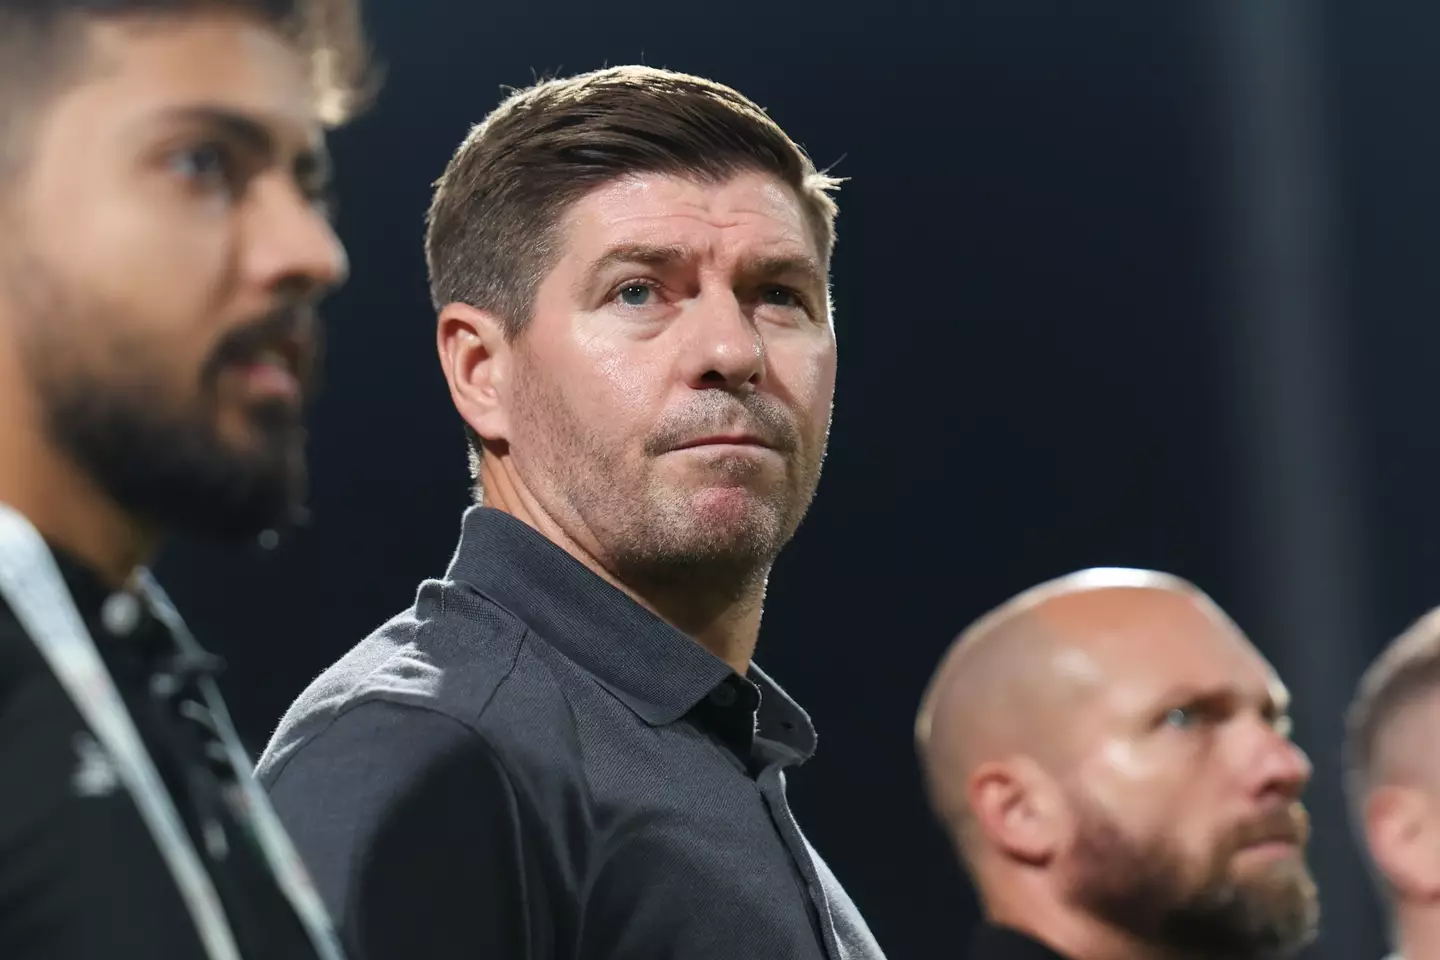 Gerrard believes his Al Ettifaq side are hard done by. (Image